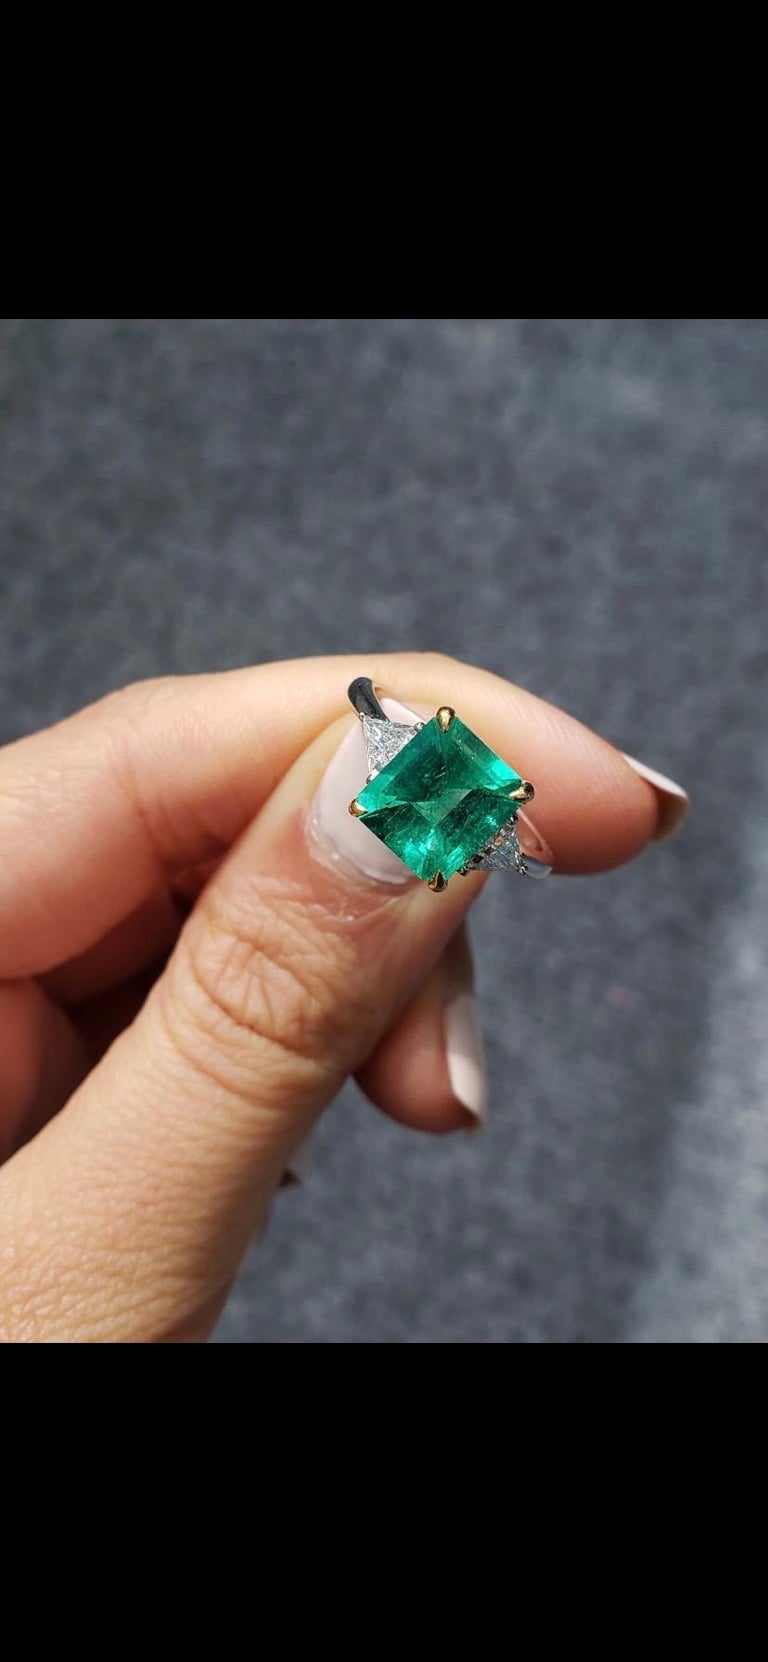 A certified vibrant, vivid green 2.36 carat emerald cut Colombian Emerald and 0.32 carat VS quality Trillion Diamond three stone, engagement ring. The stones are set in 18K White Gold. Currently sized at US 7, can be altered. 
We accept